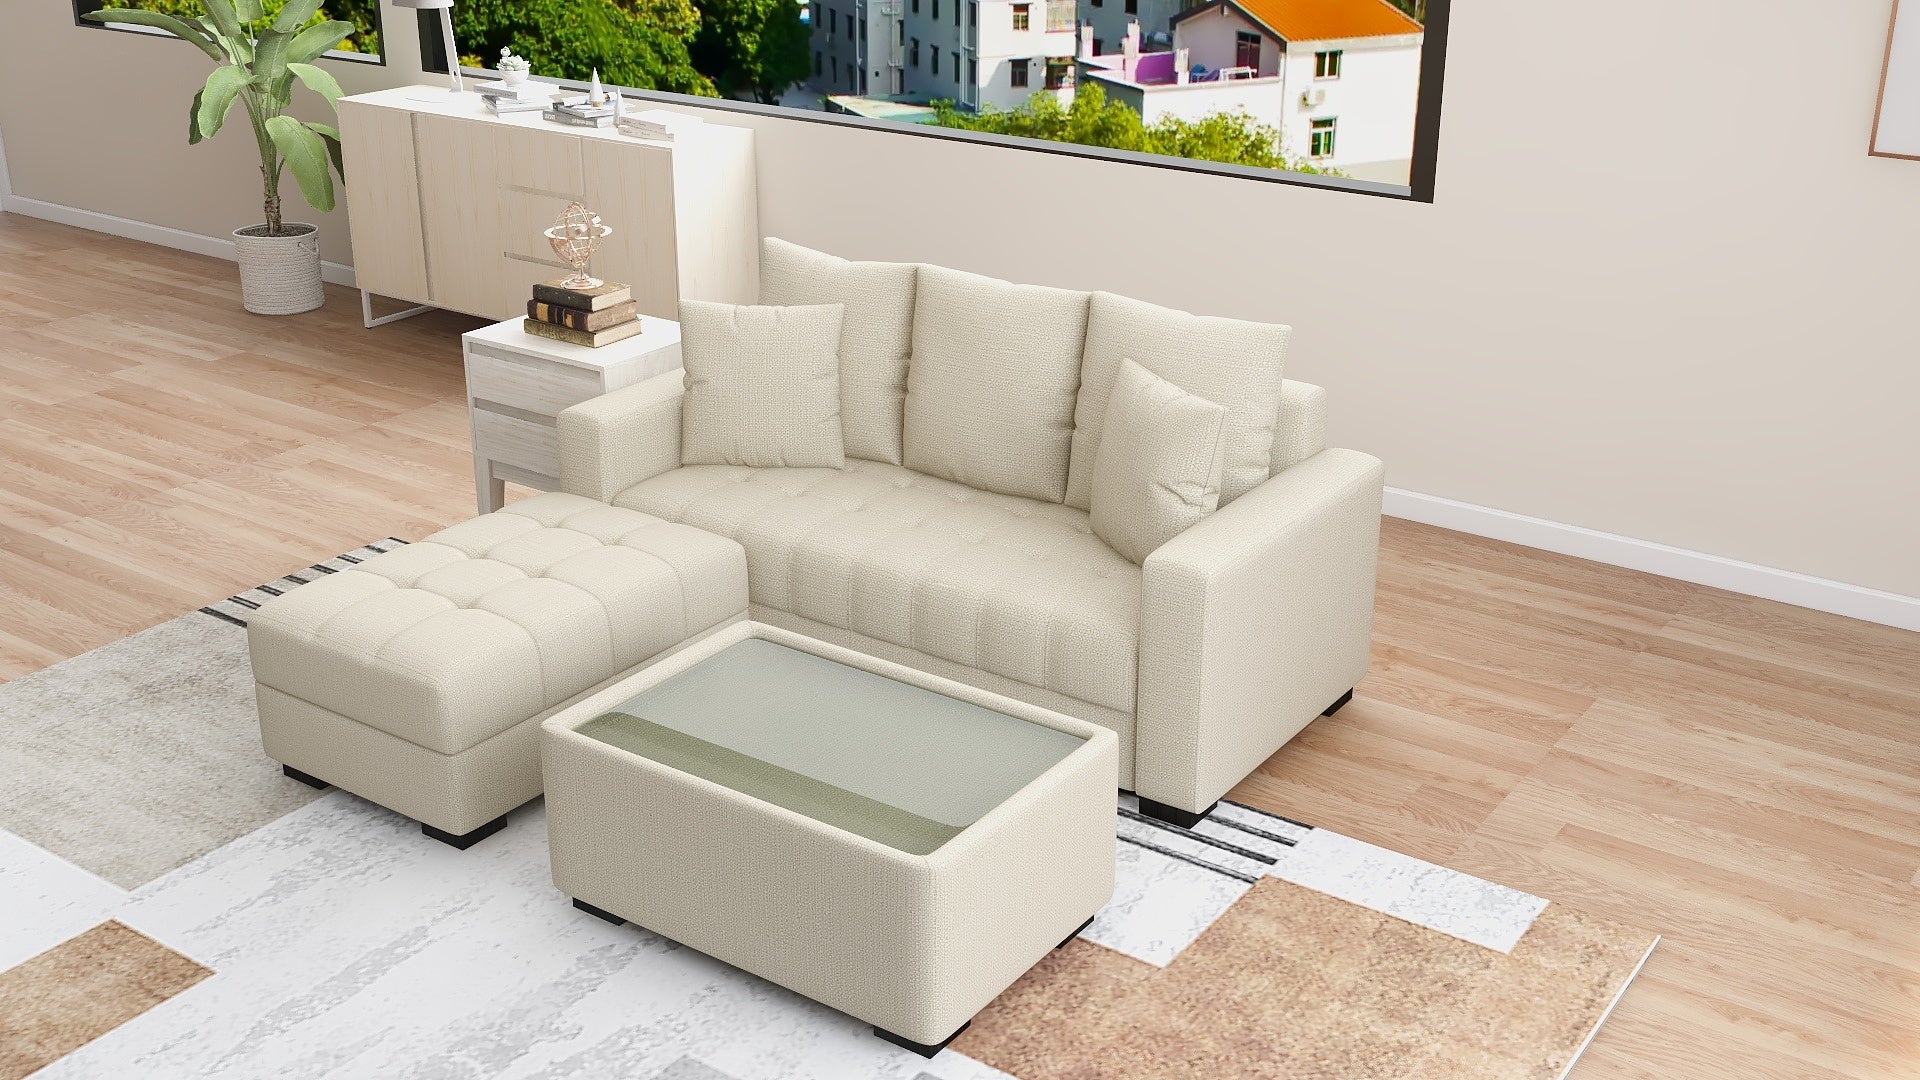 SYLVESTRE Fabric Sofa Set with Ottoman and Center Table with glass top AF Home